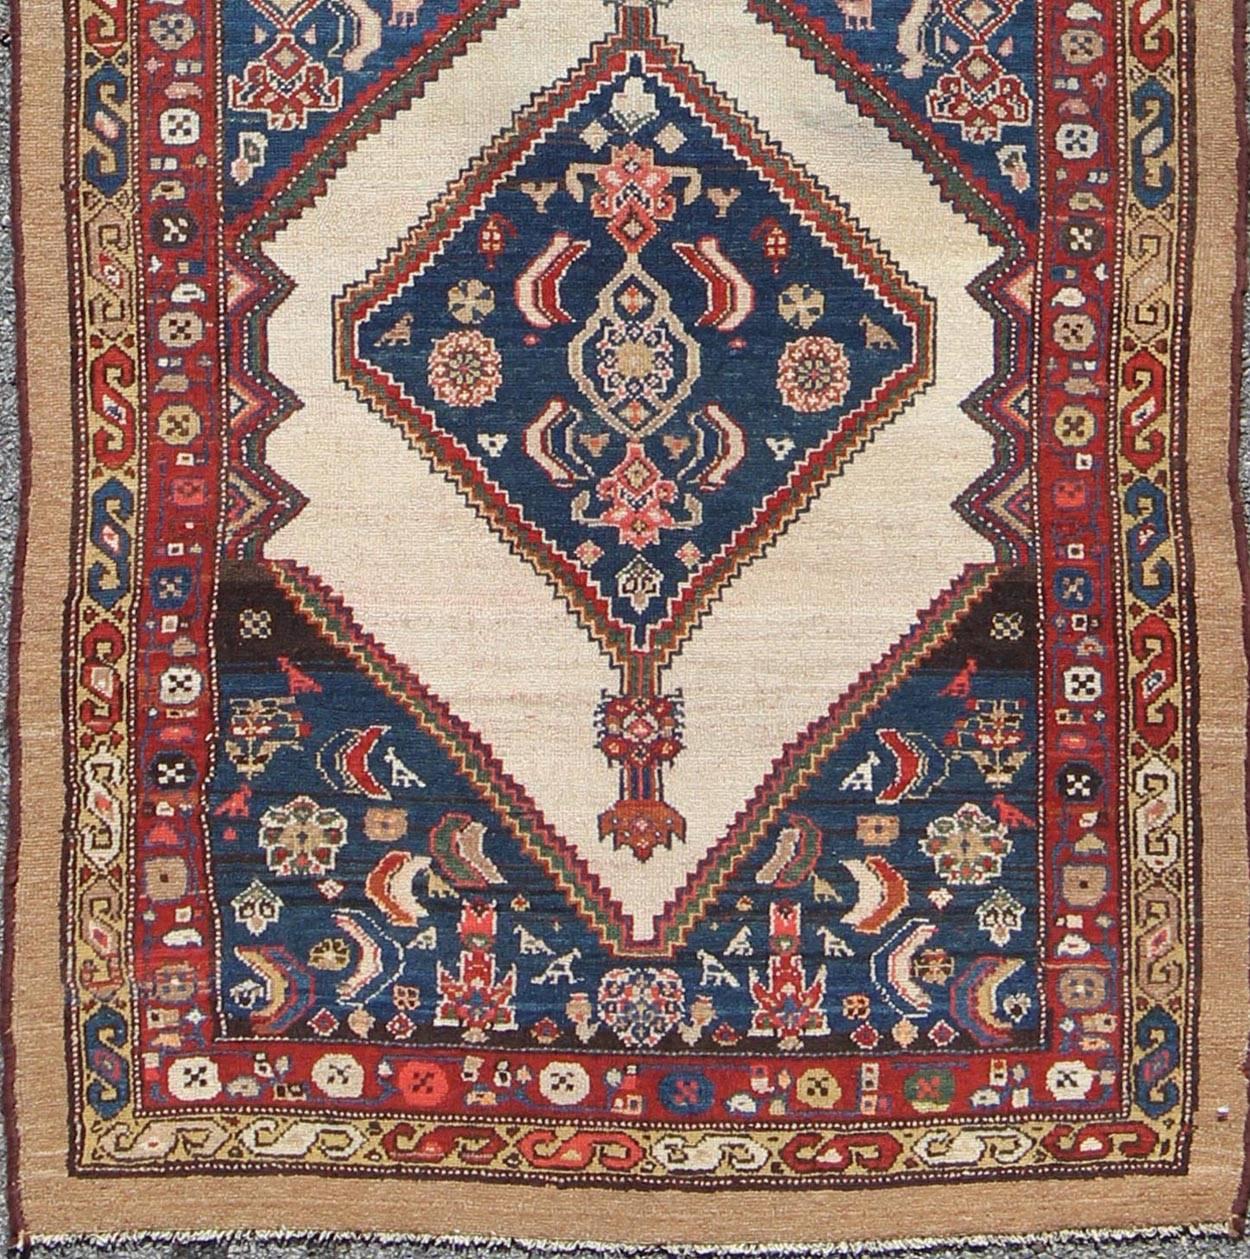 This rare Antique Serab runner from the late 19th Century contains beautiful multi-colored dual medallions set within a contained border of cream. This is surrounded by a delightful field of blue, containing patterns of flowers, plants, moons and